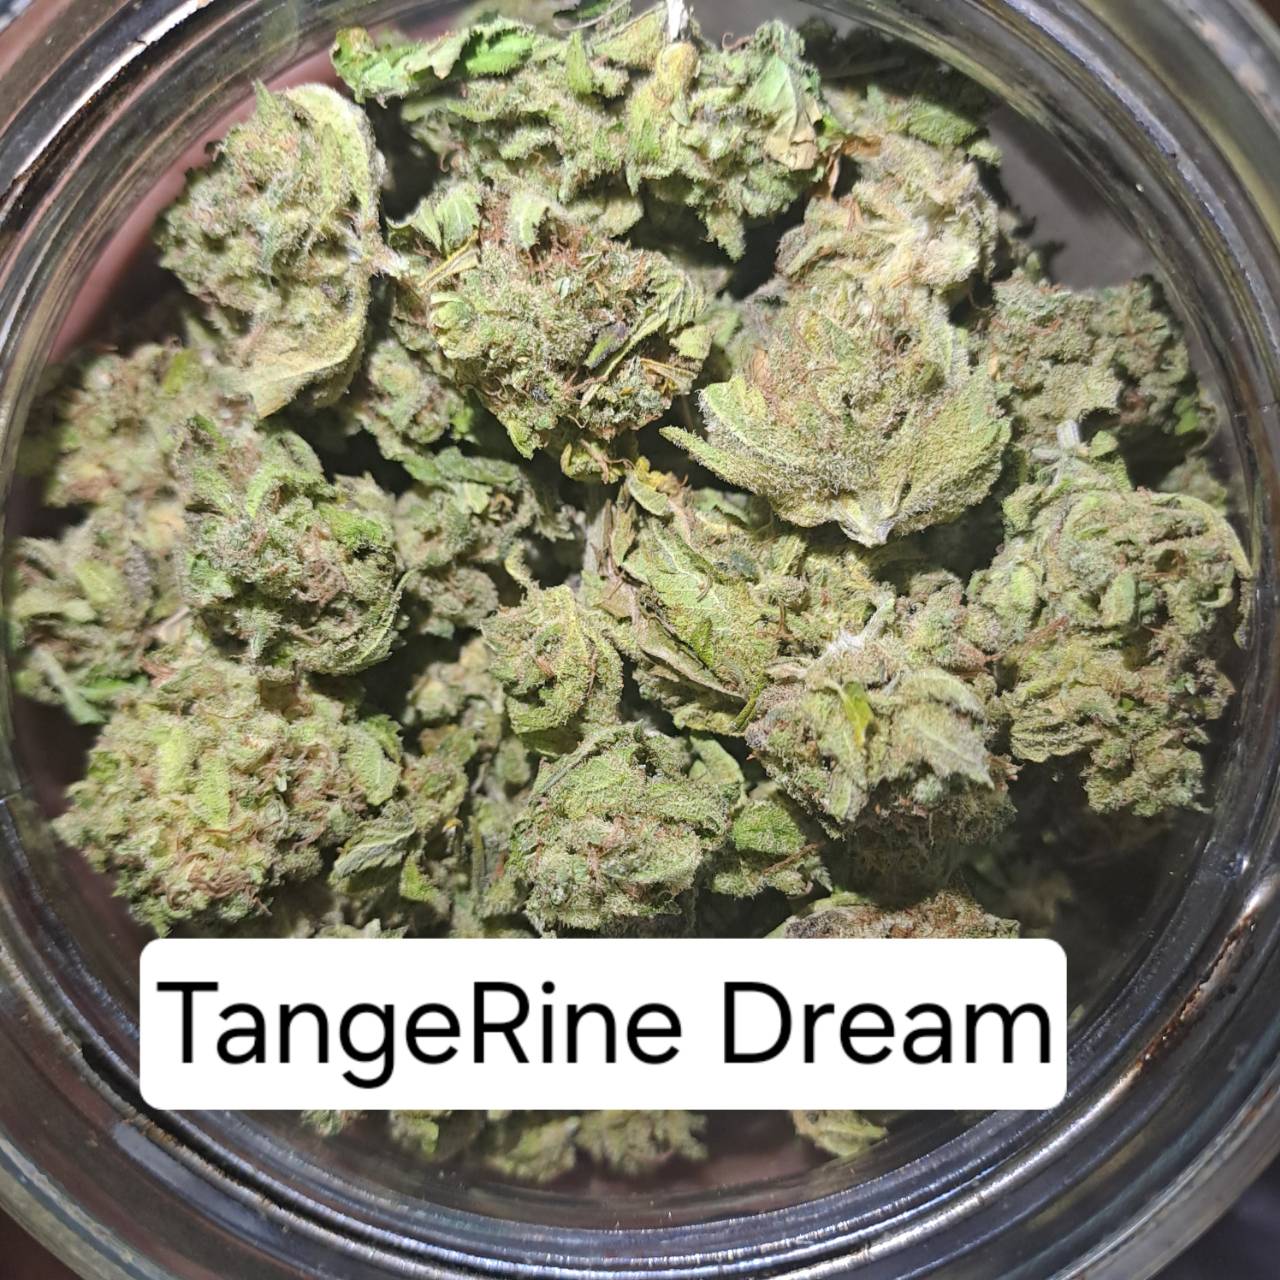 Product Image for Tangerine Dream